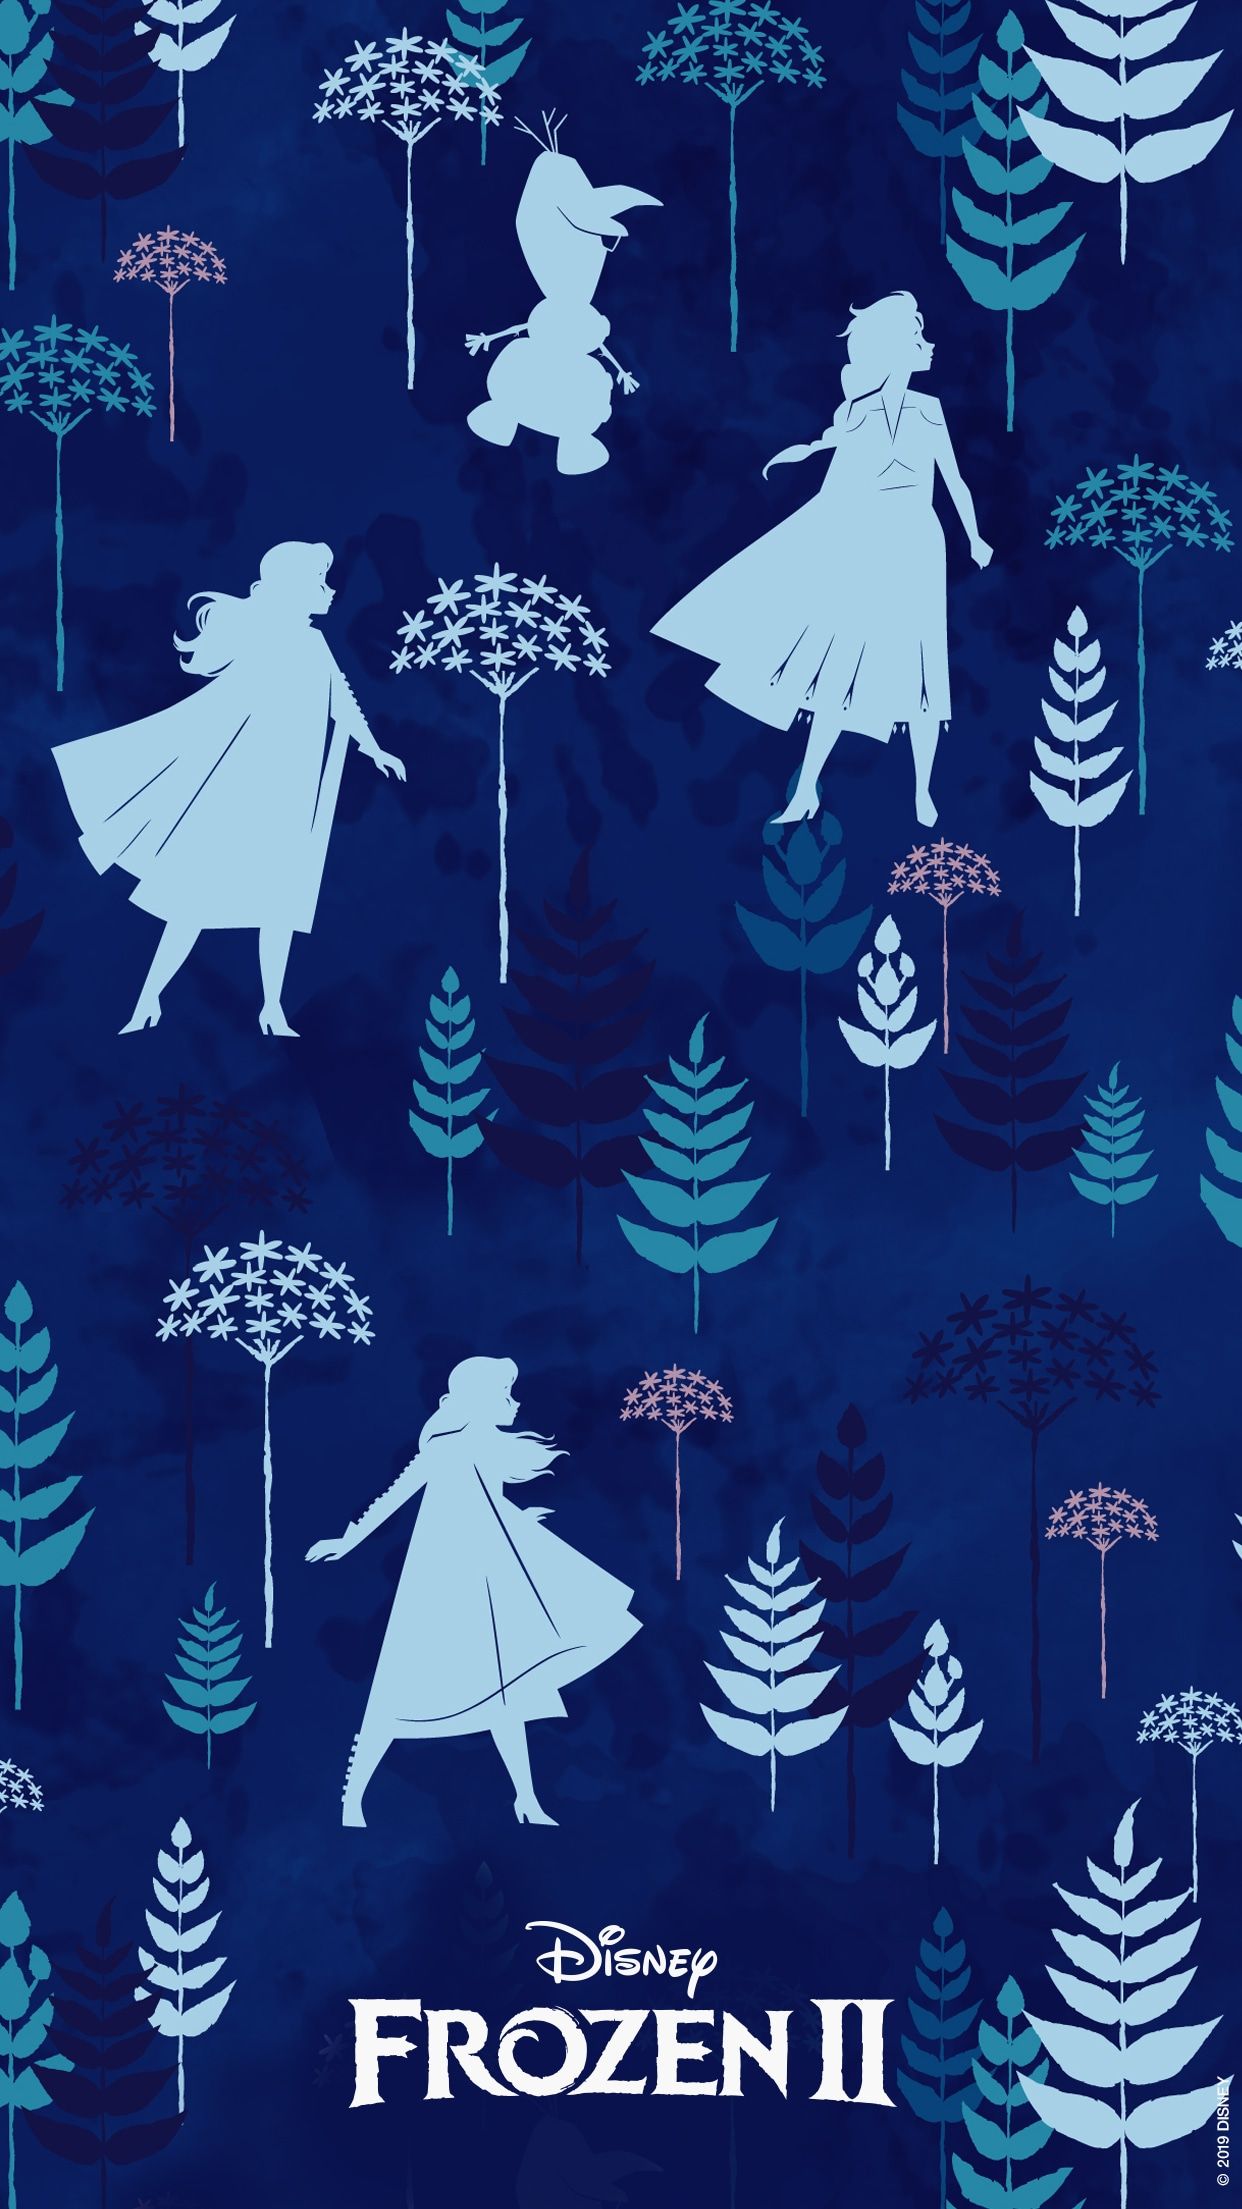 These Disney's Frozen 2 Mobile Wallpaper Will Put You In A Mood For Adventure